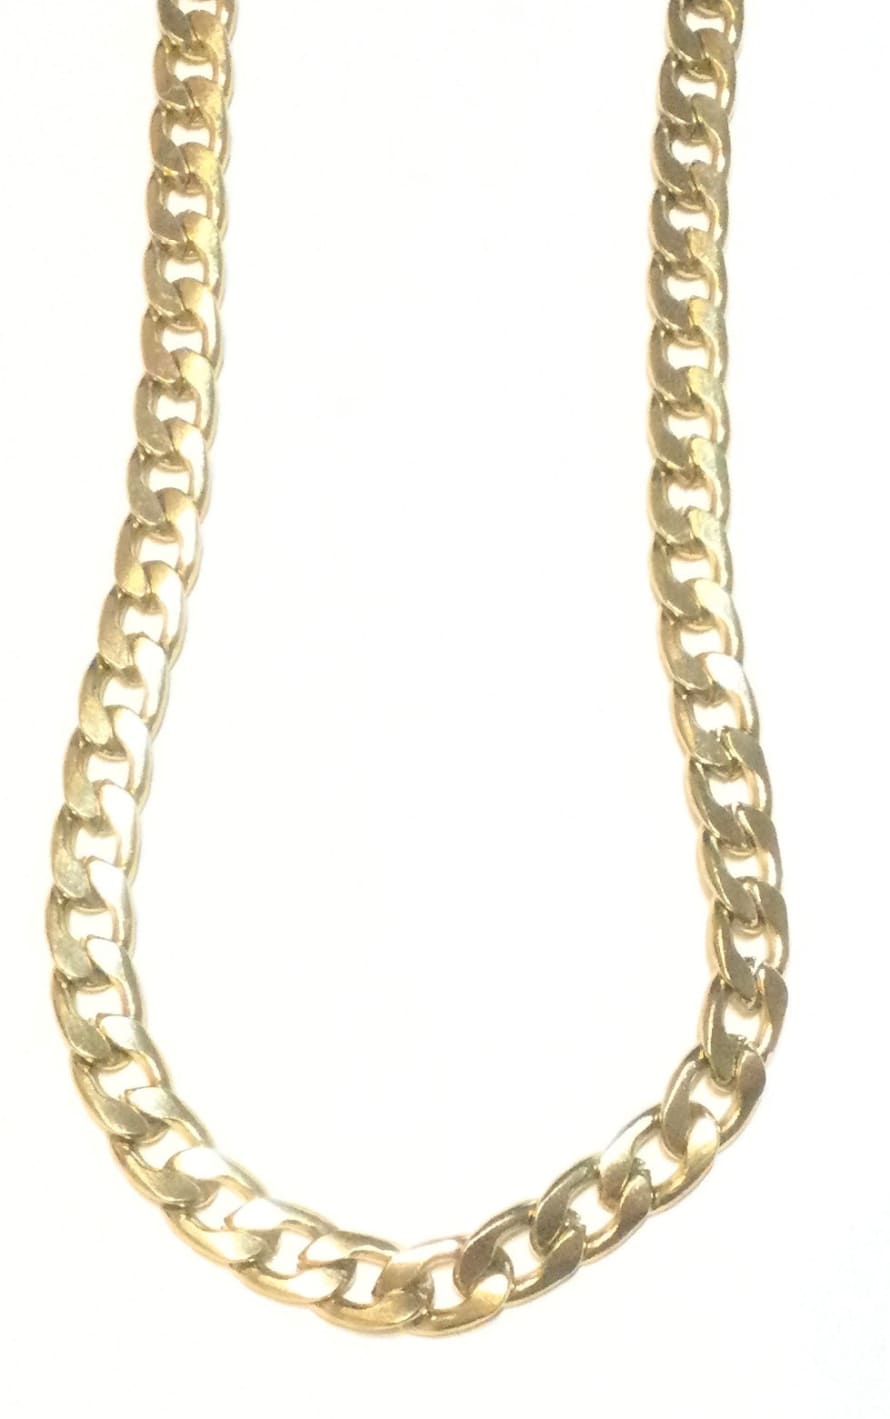 Urbiana Stainless Steel Necklace